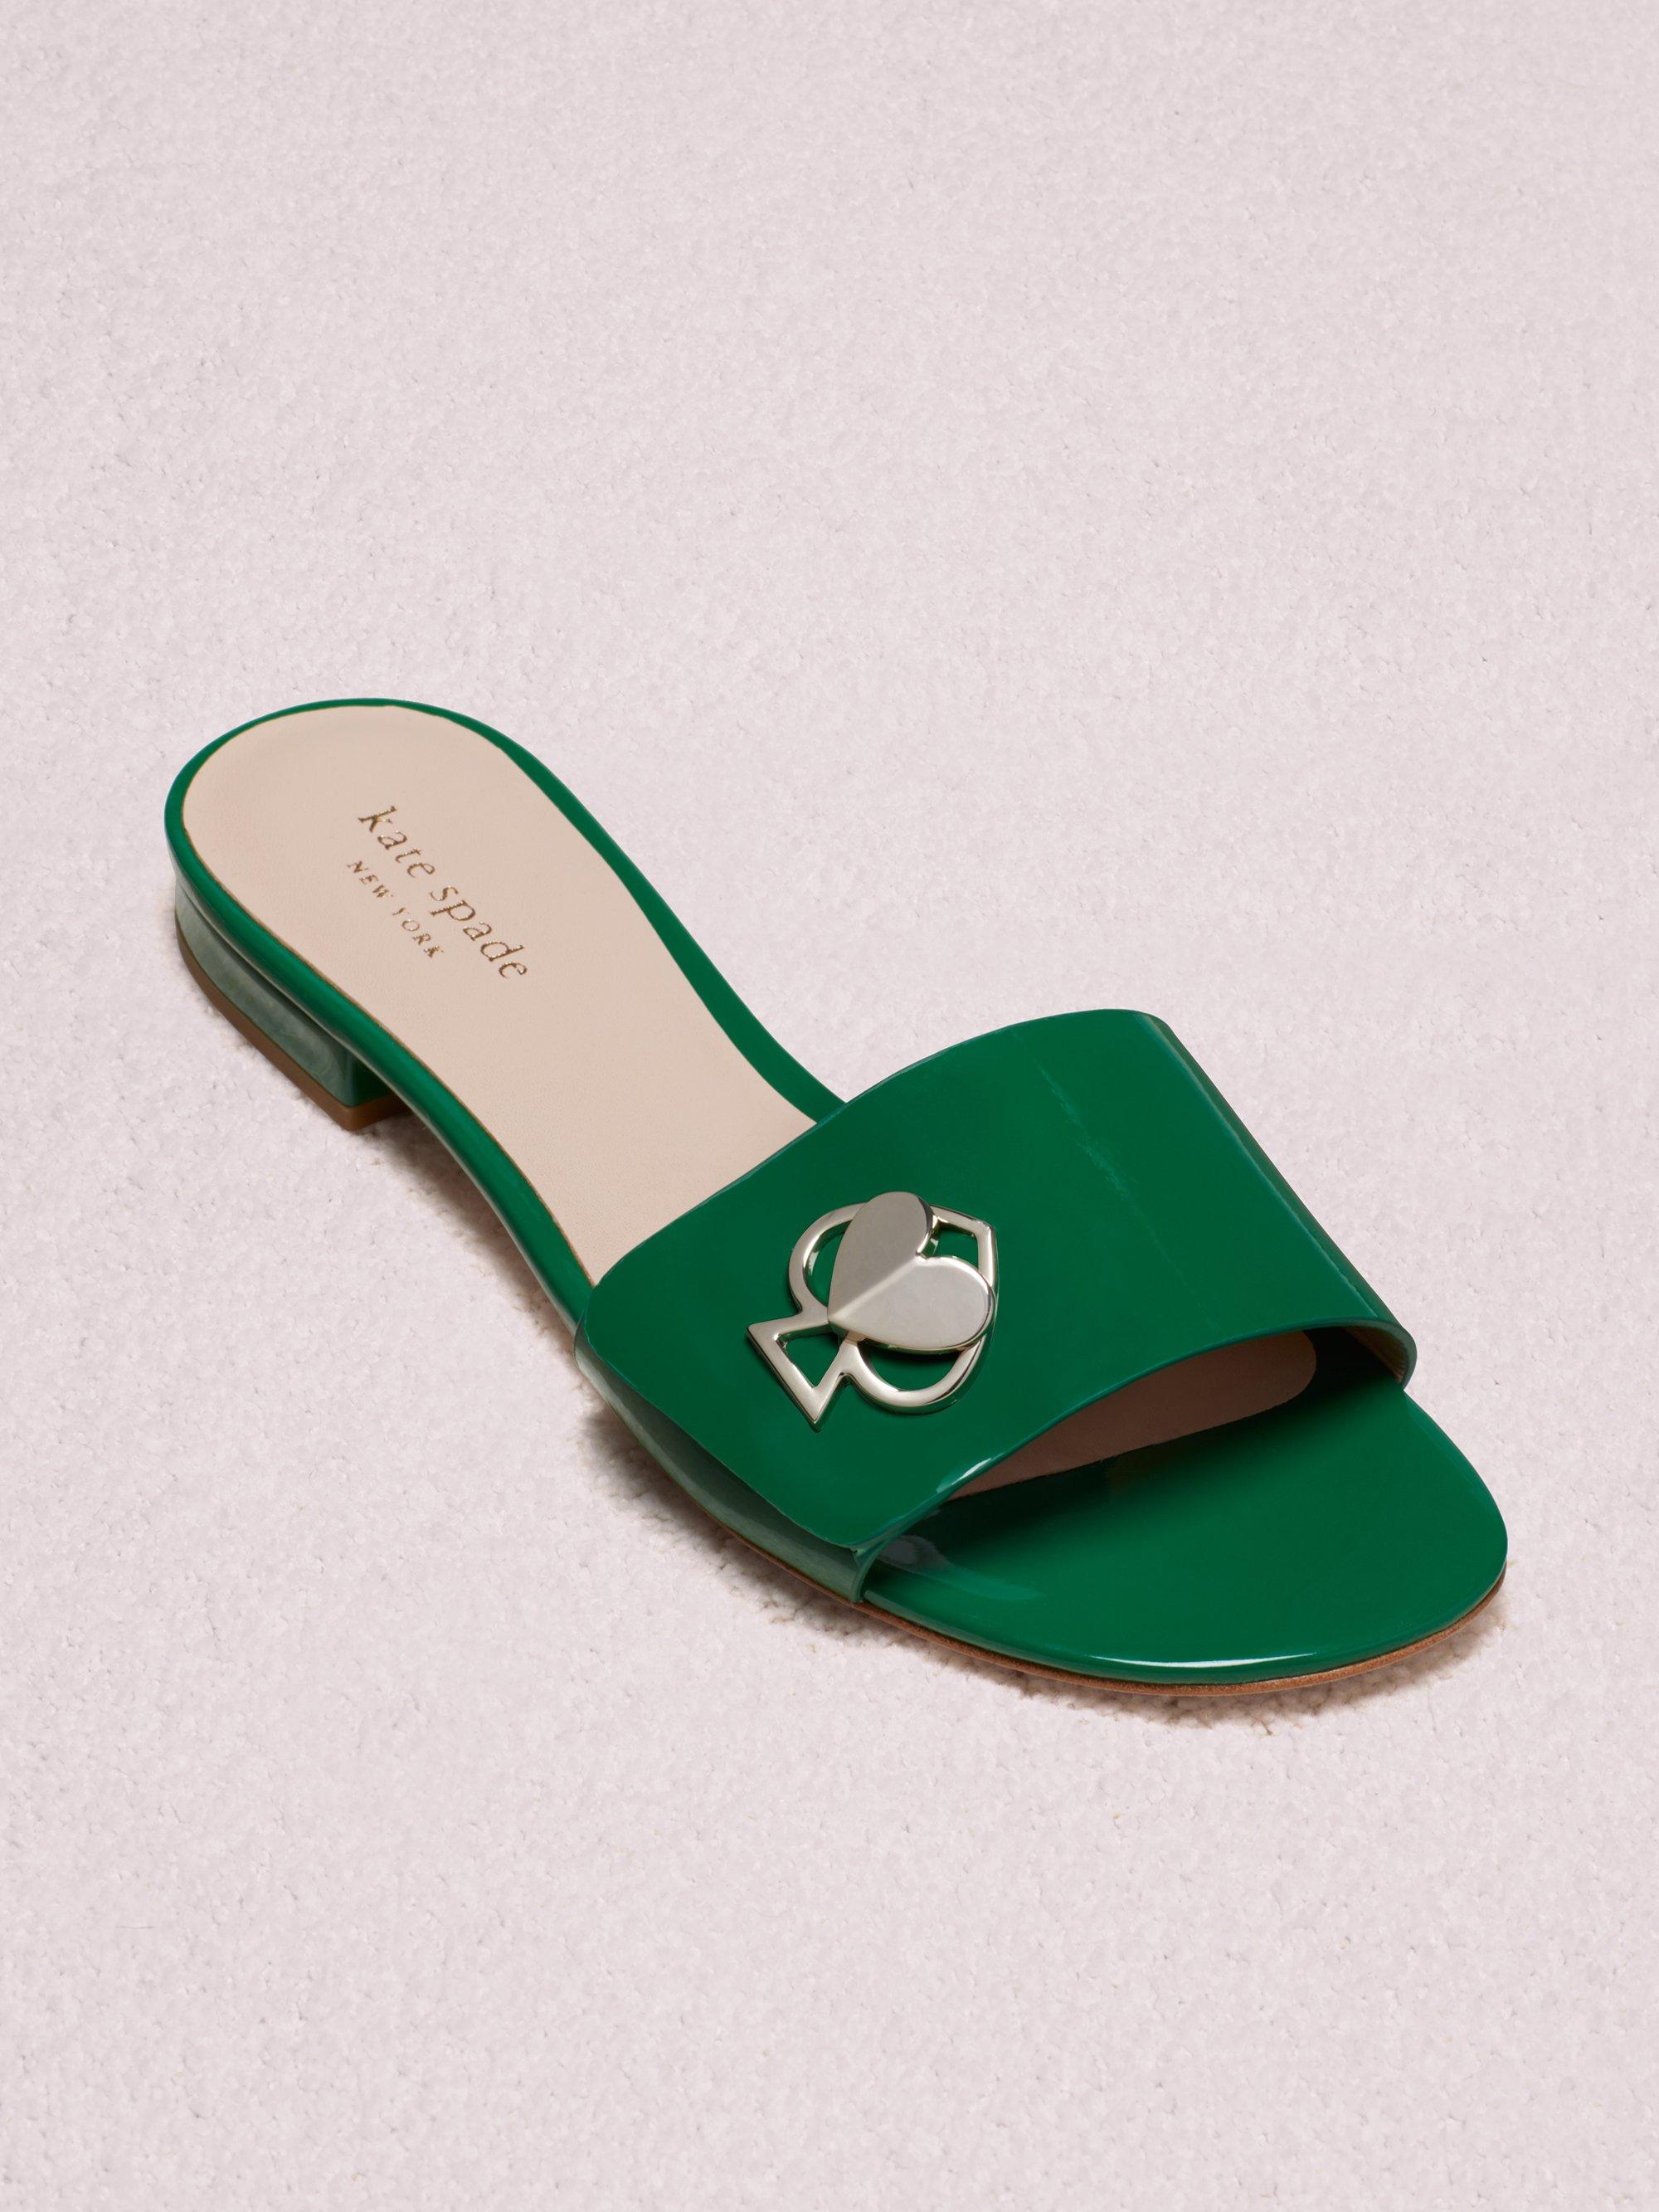 Kate Spade Leather Ferry Slide Sandals in Green - Lyst